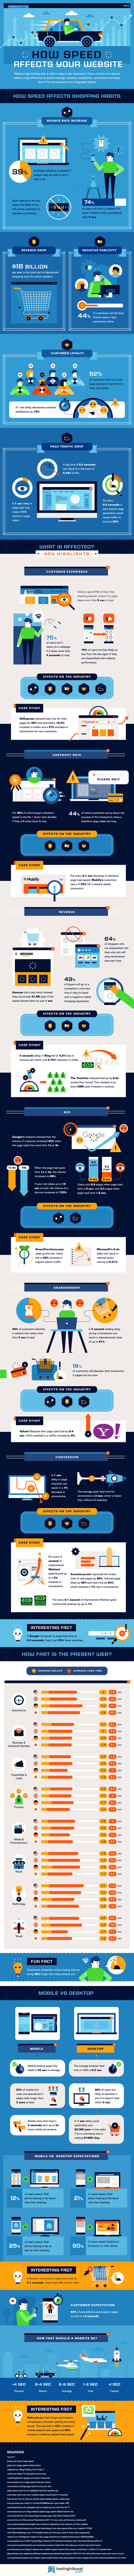 How Speed Affects Your Website (Infographic)